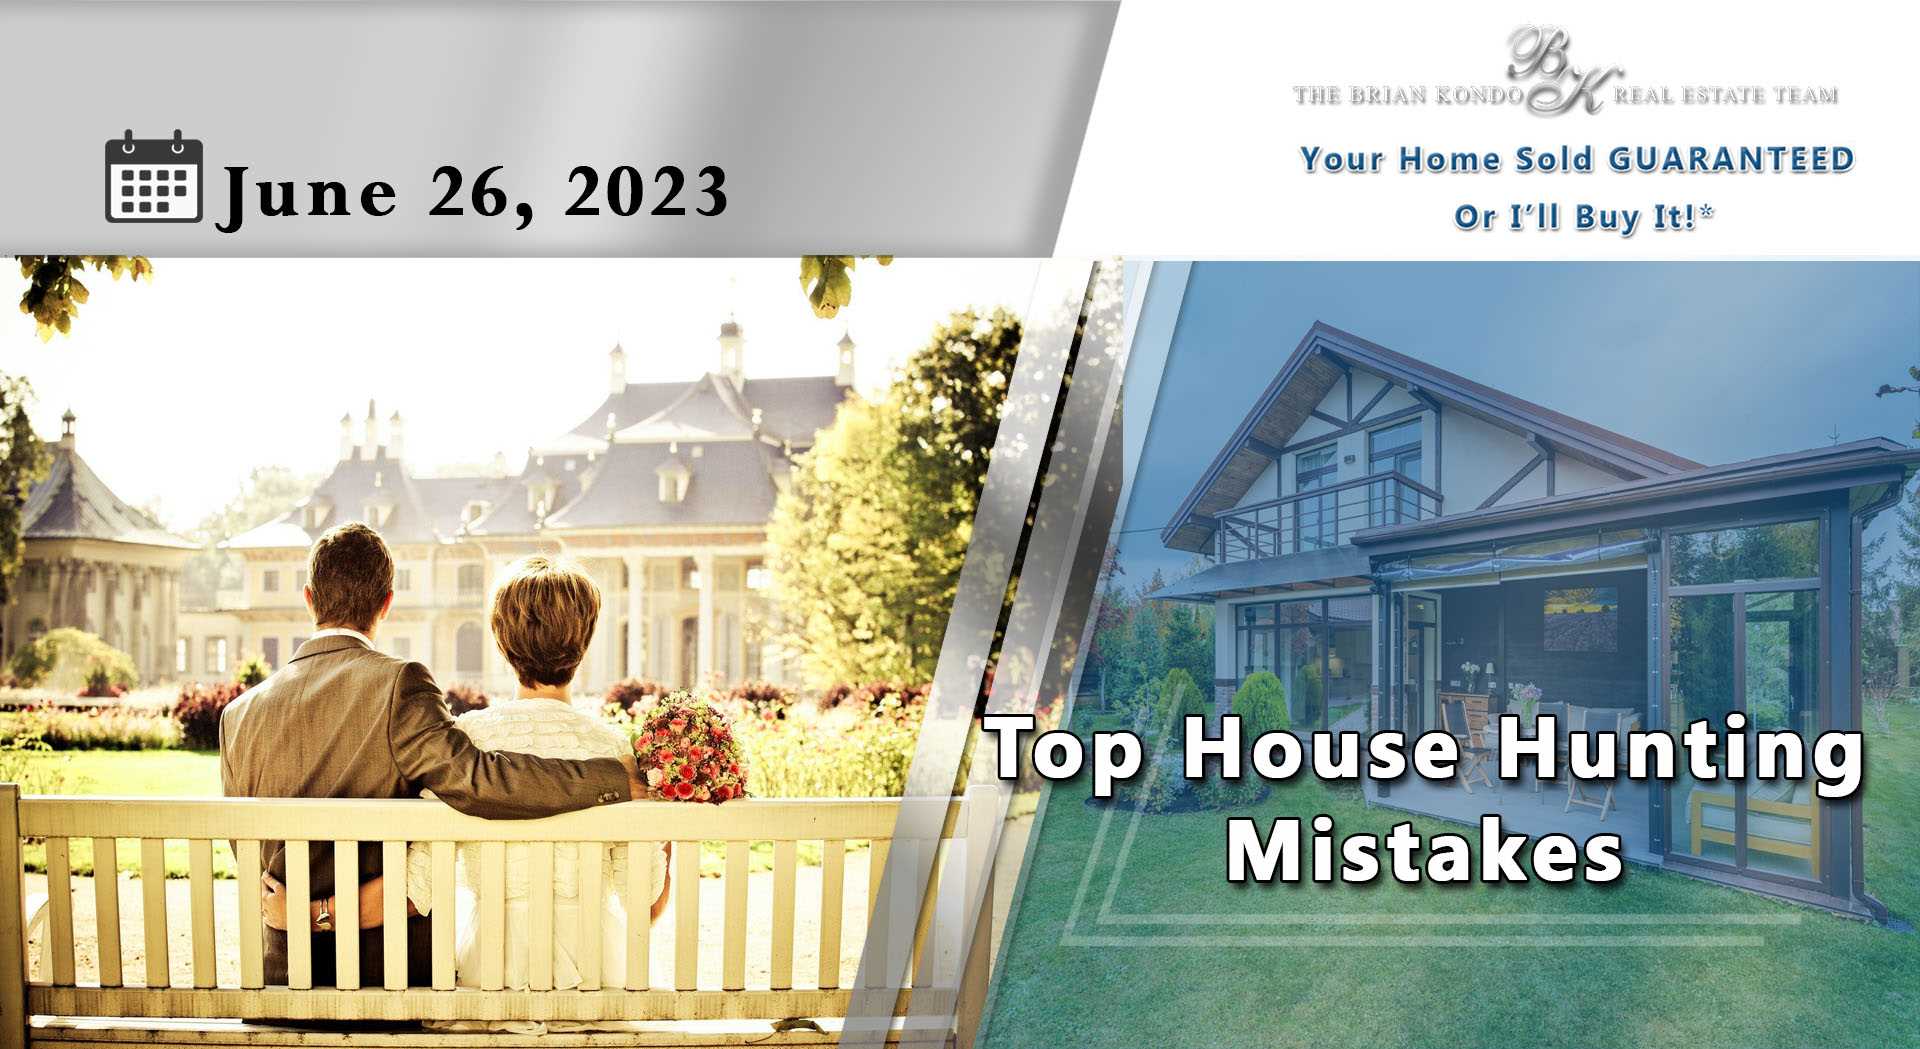 Top House Hunting Mistakes